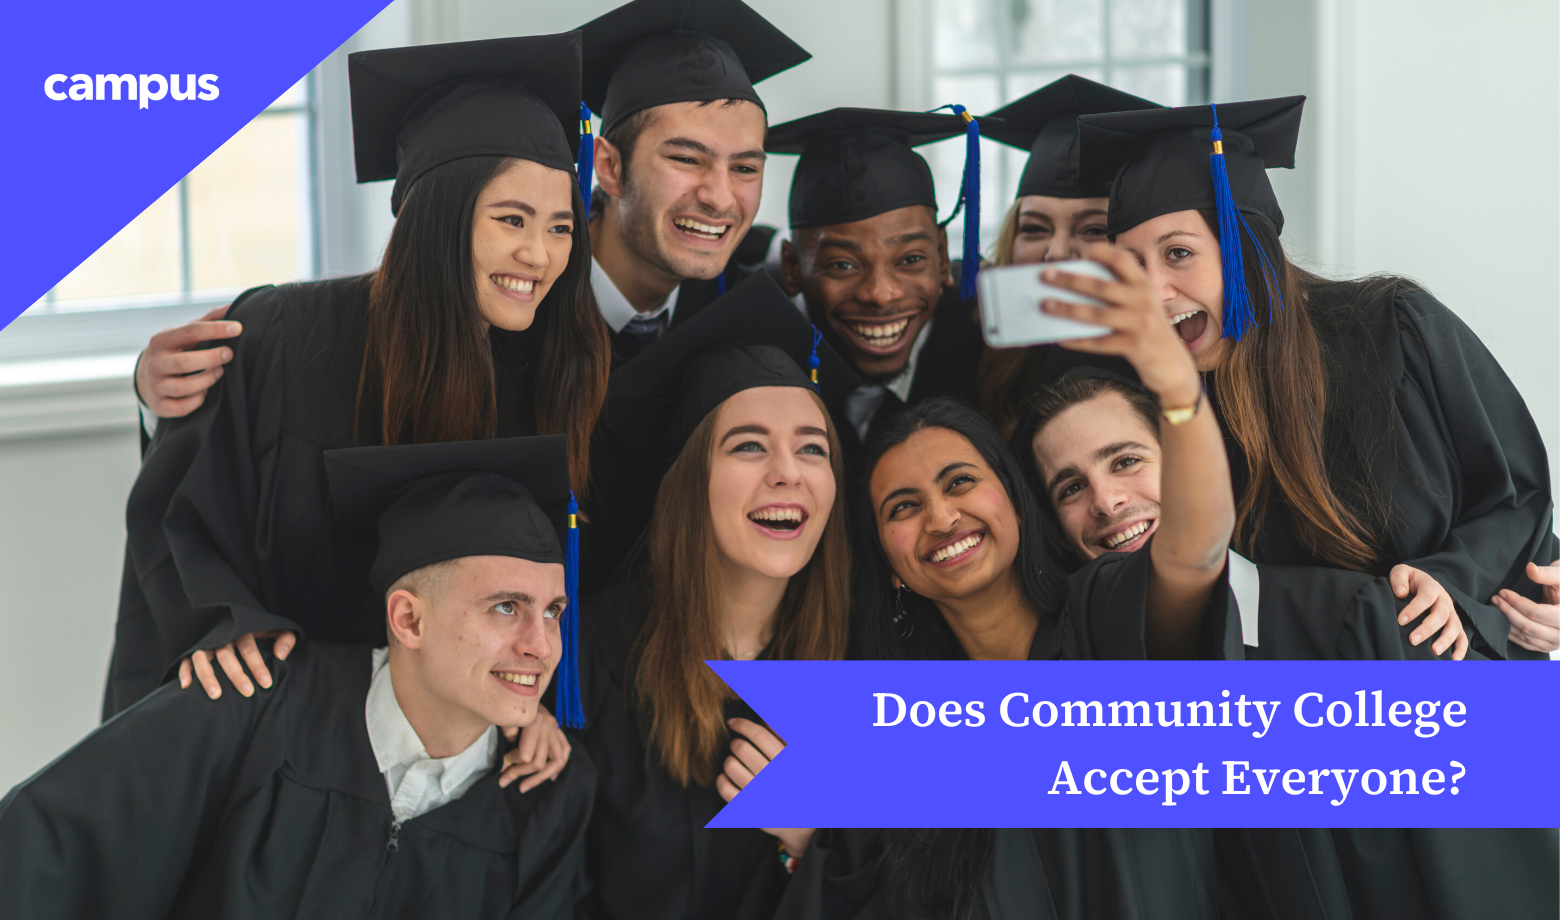 Do Community Colleges Accept Everyone?